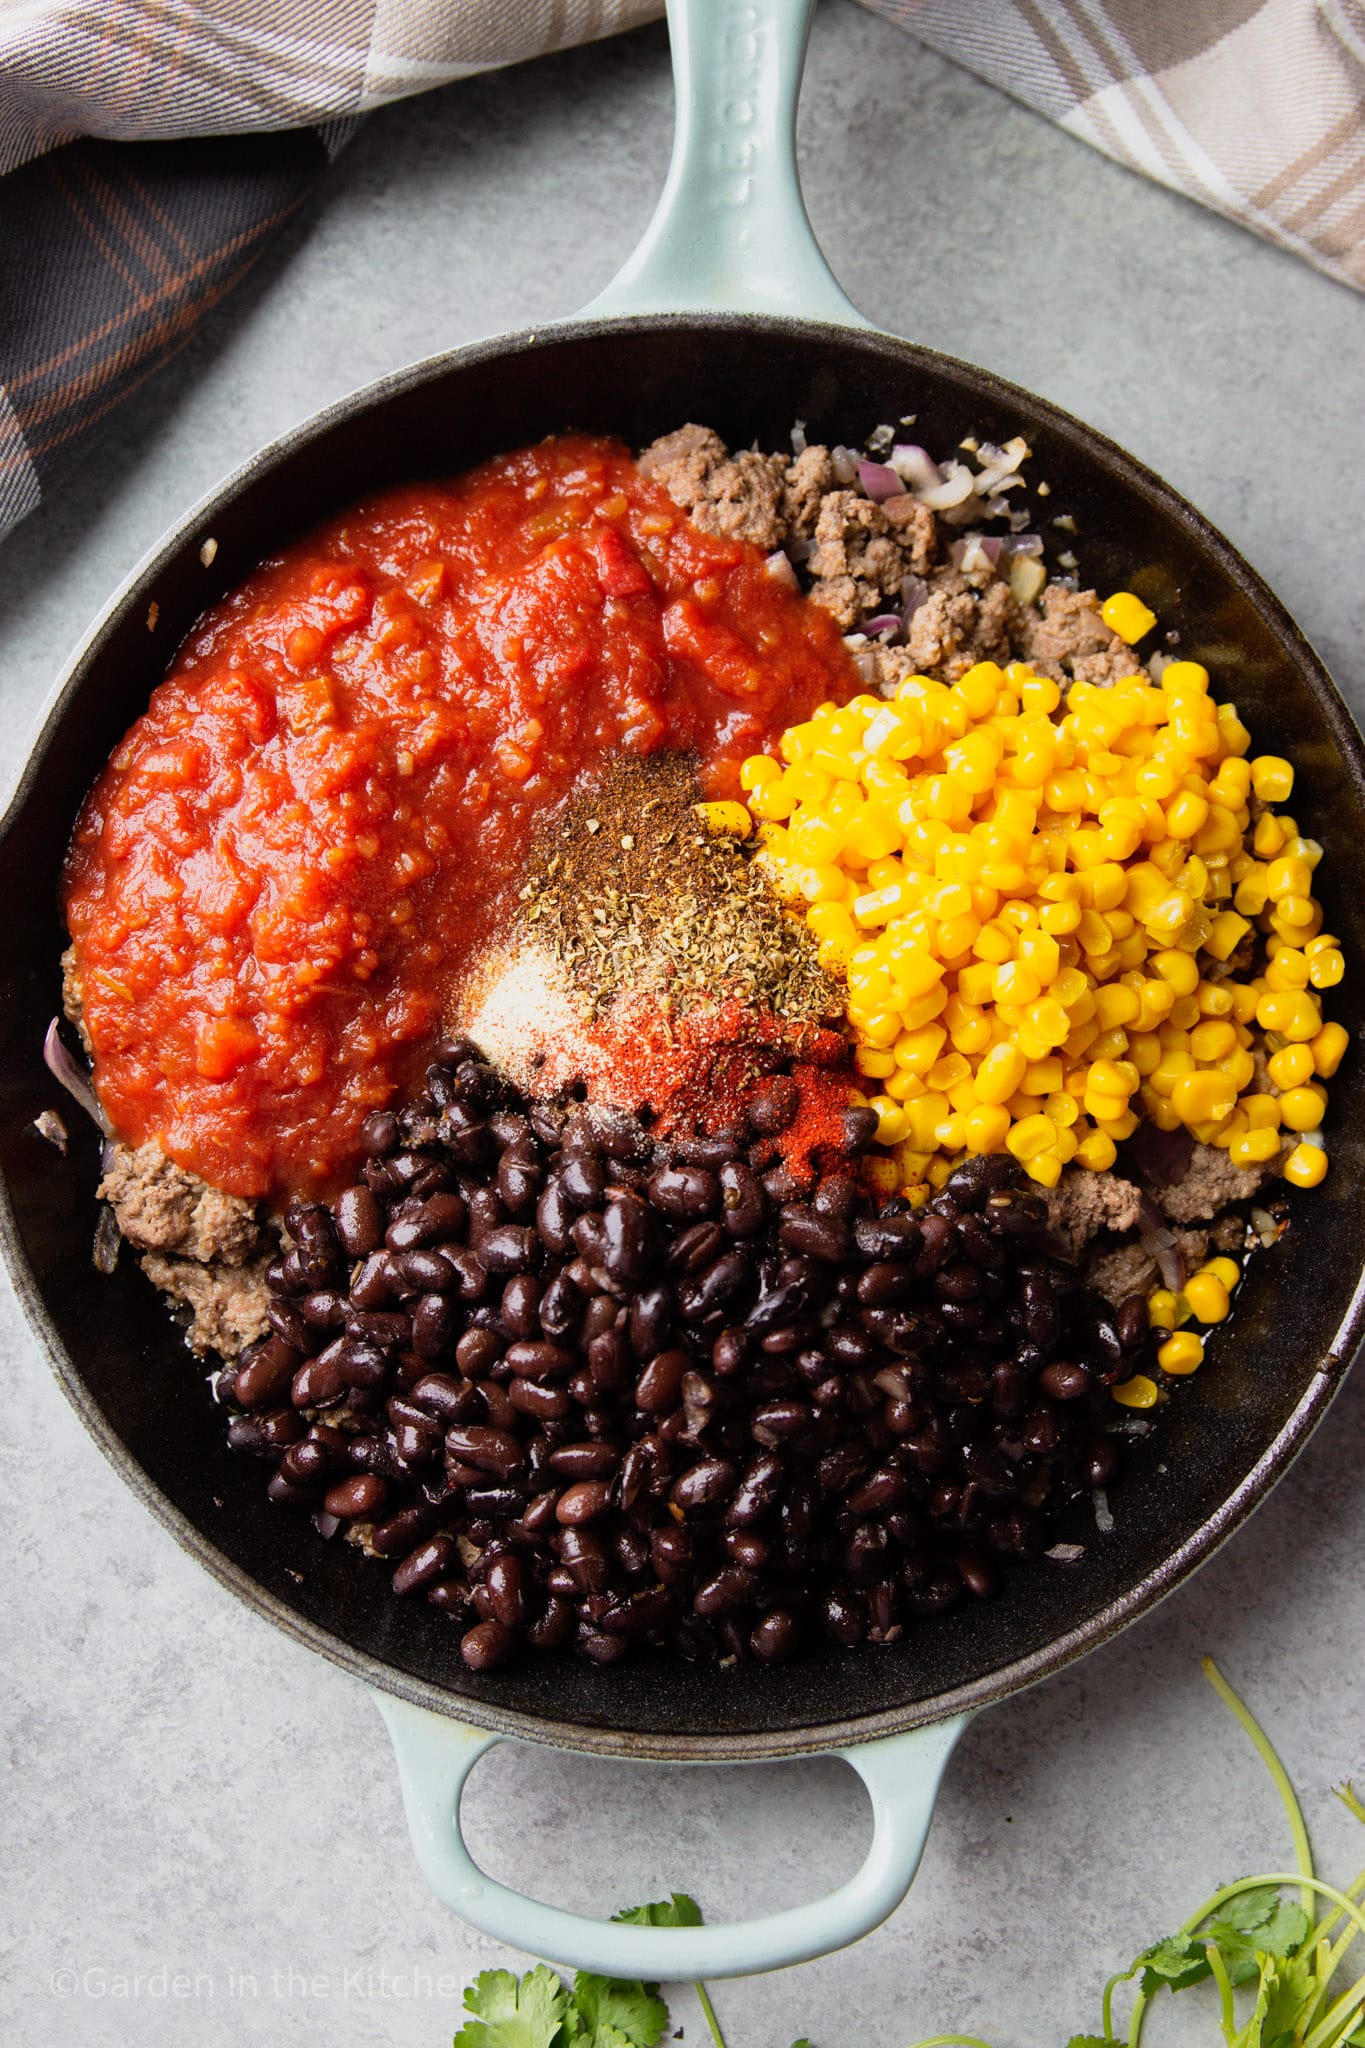 corn, black beans, red salsa, and spices on top of cooked ground beef in a black skillet.